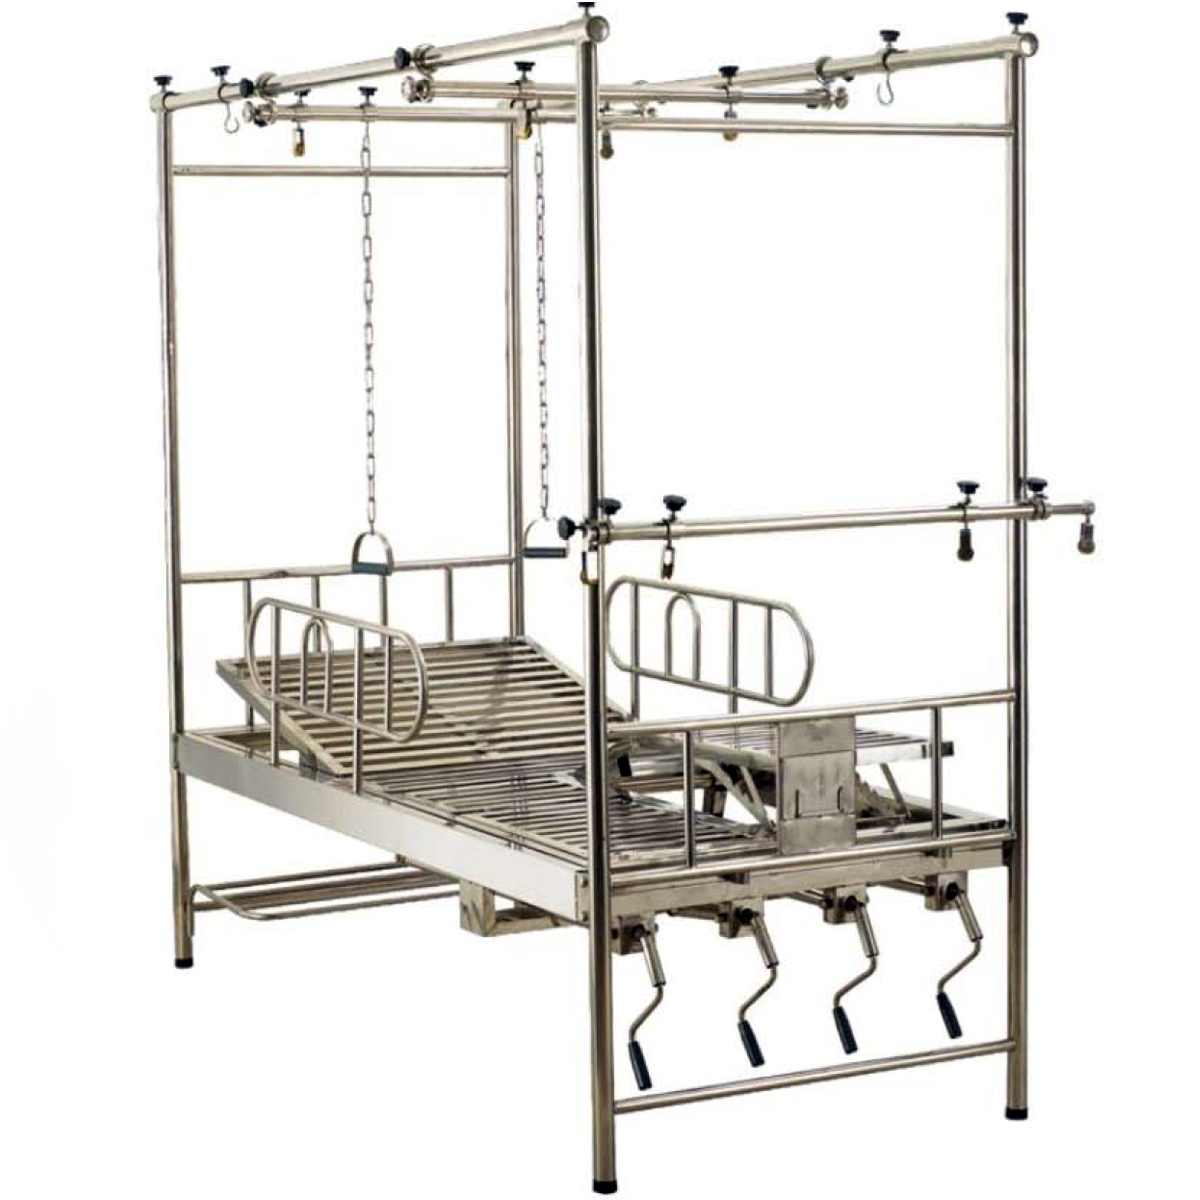 Stainless Steel Orthopaedic Bed